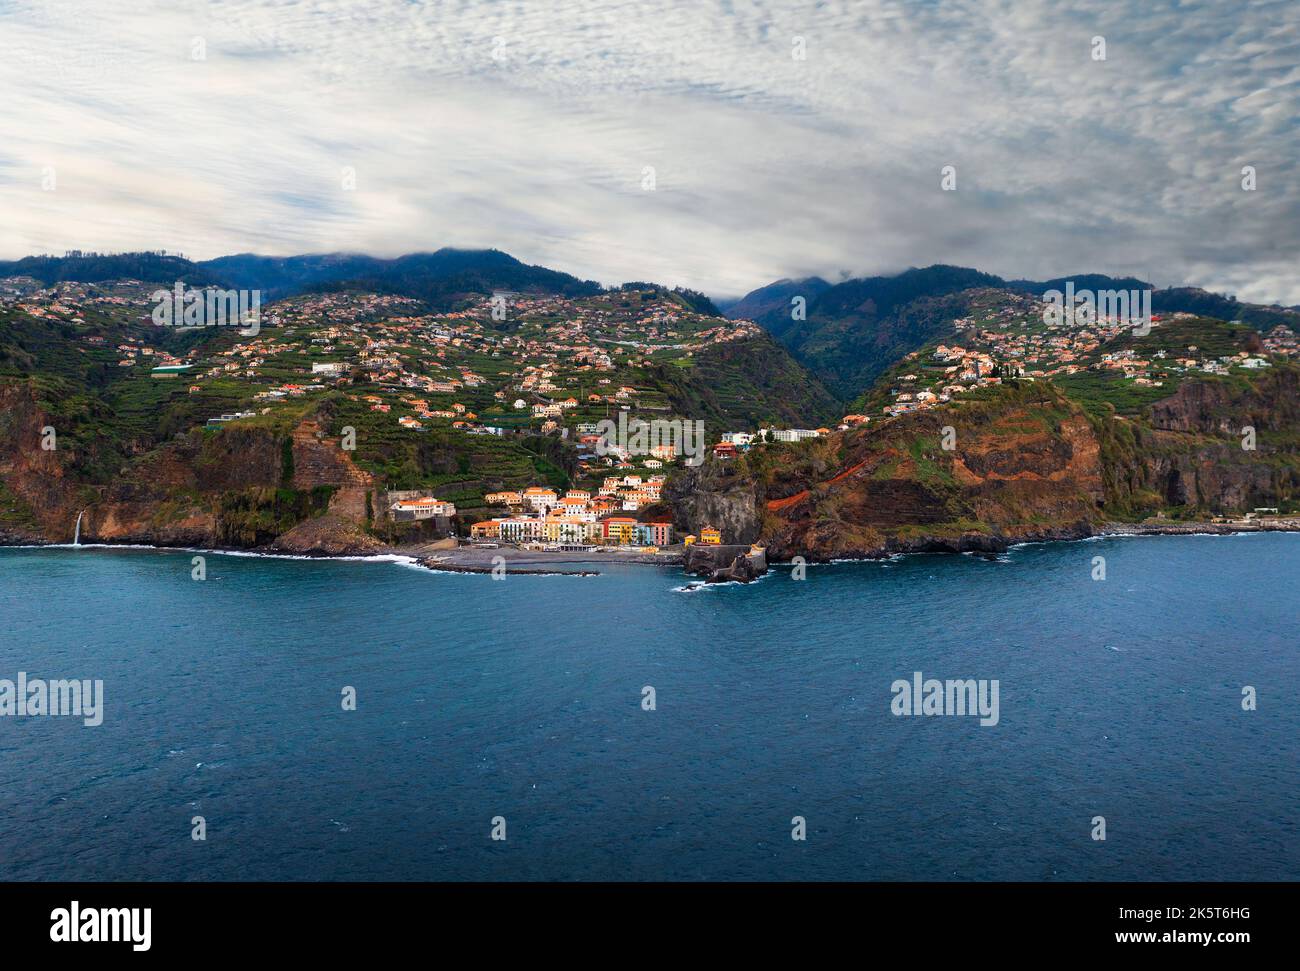 Aerial view of Ponta do Sol in Madeira island, Portugal Stock Photo